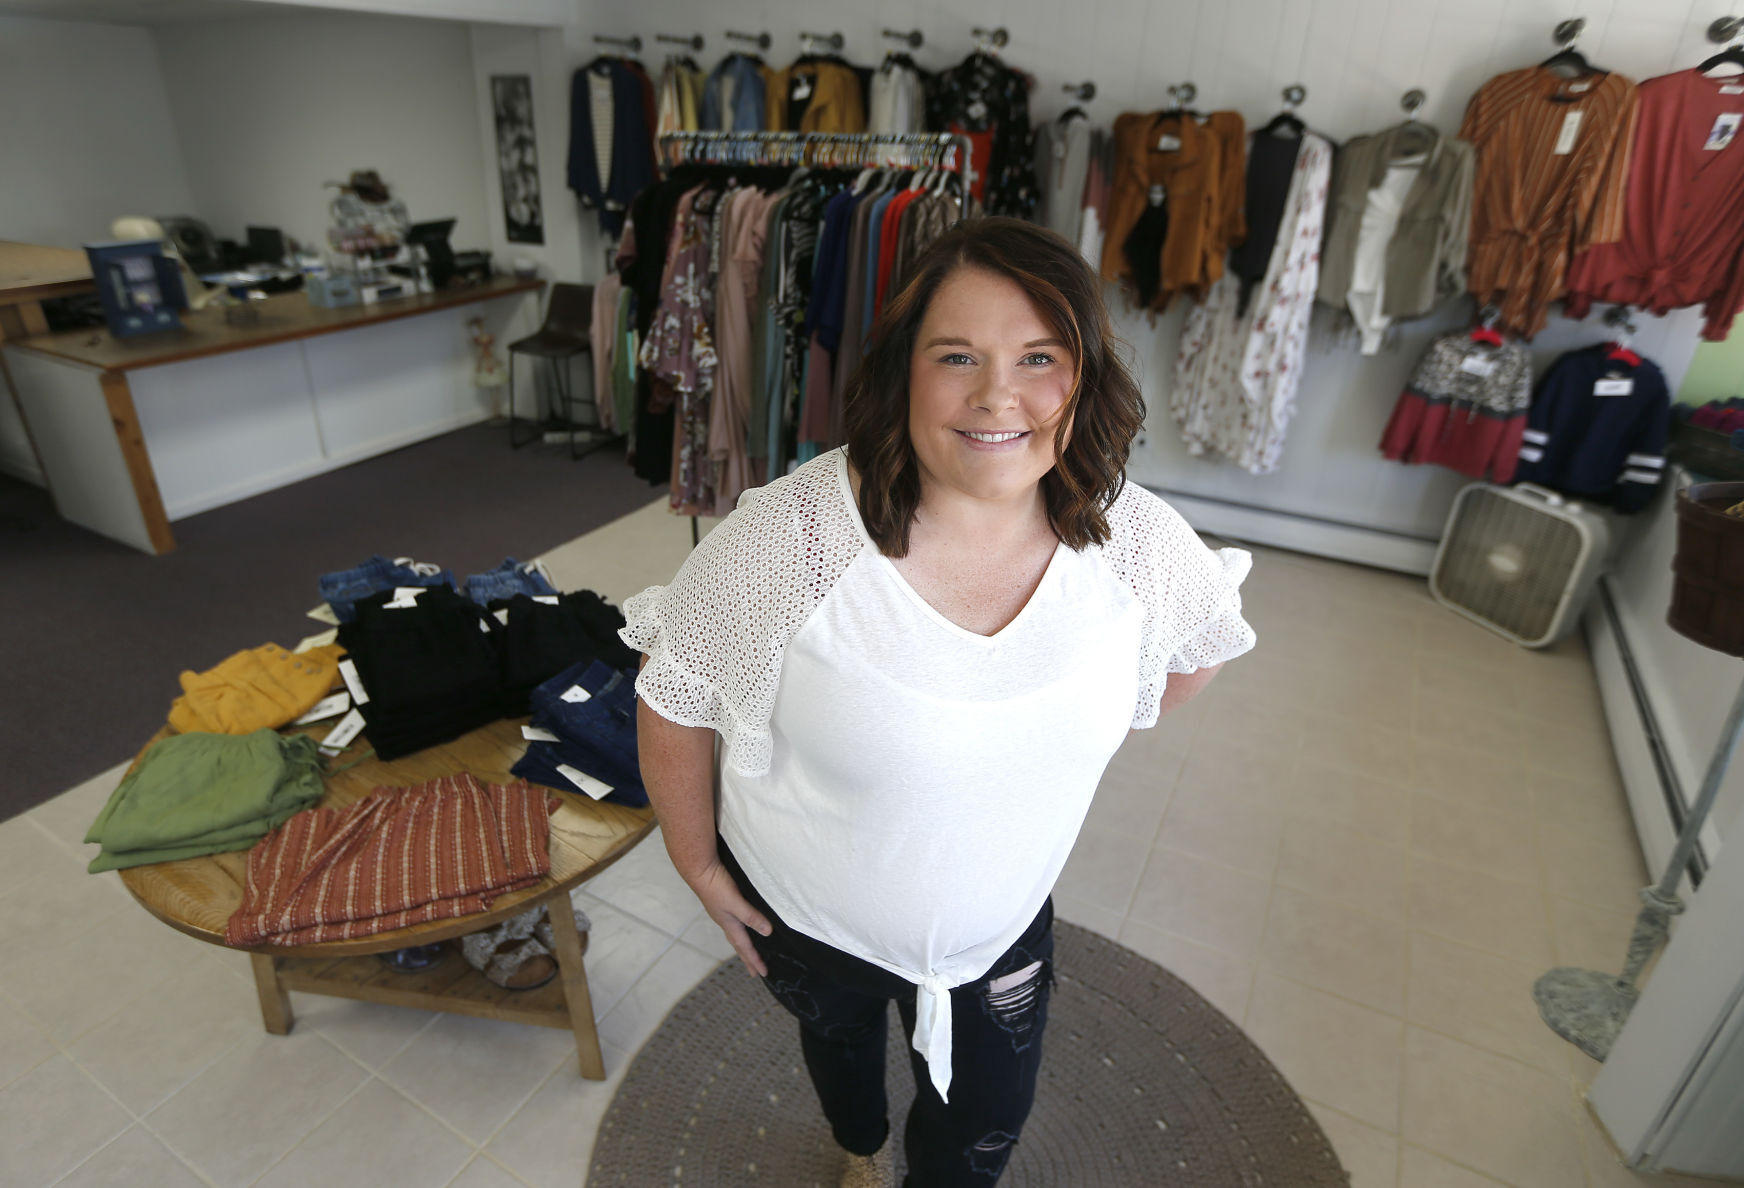 Abbey Weigel is the owner of Modern Backroad Boutique in East Dubuque, Ill. She recently expanded her location to Sinsinawa Avenue. PHOTO CREDIT: Dave Kettering